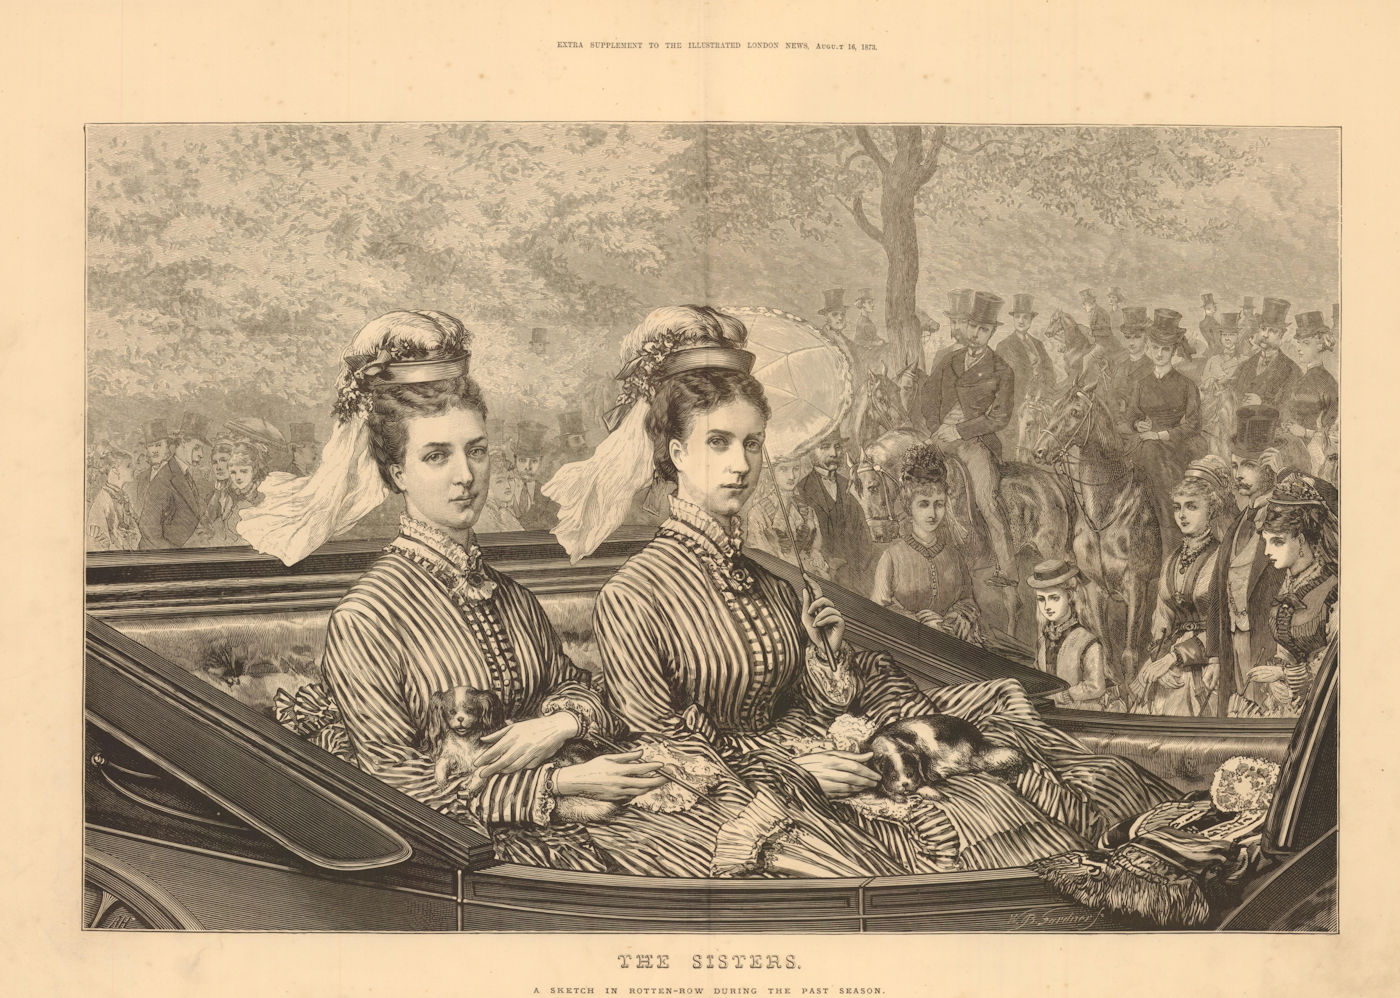 The Sisters. A Sketch in Rotten Row. Hyde Park. Carriages 1873 ILN full page